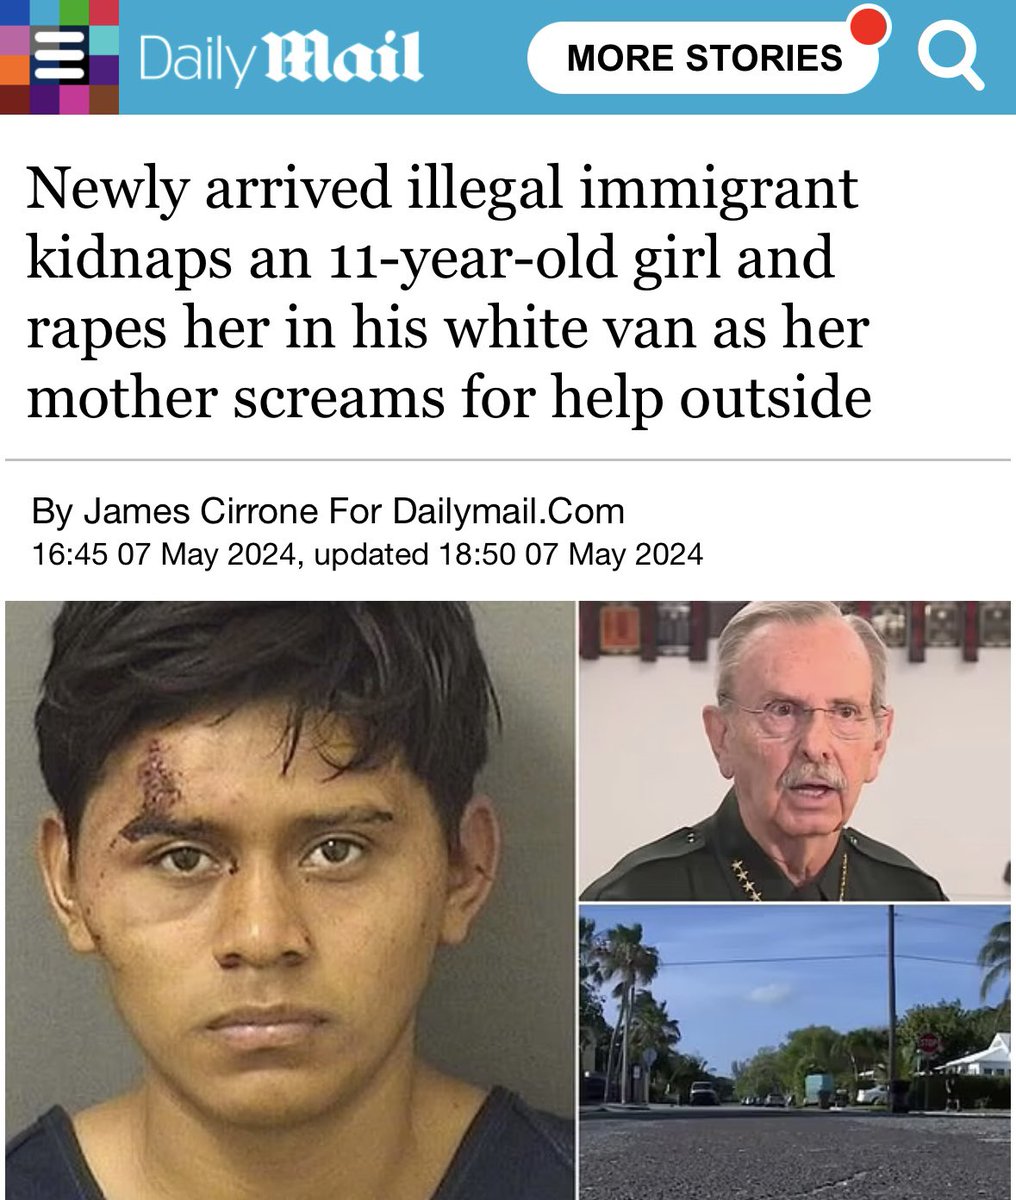 The joys of open borders. 

Truly sickening.